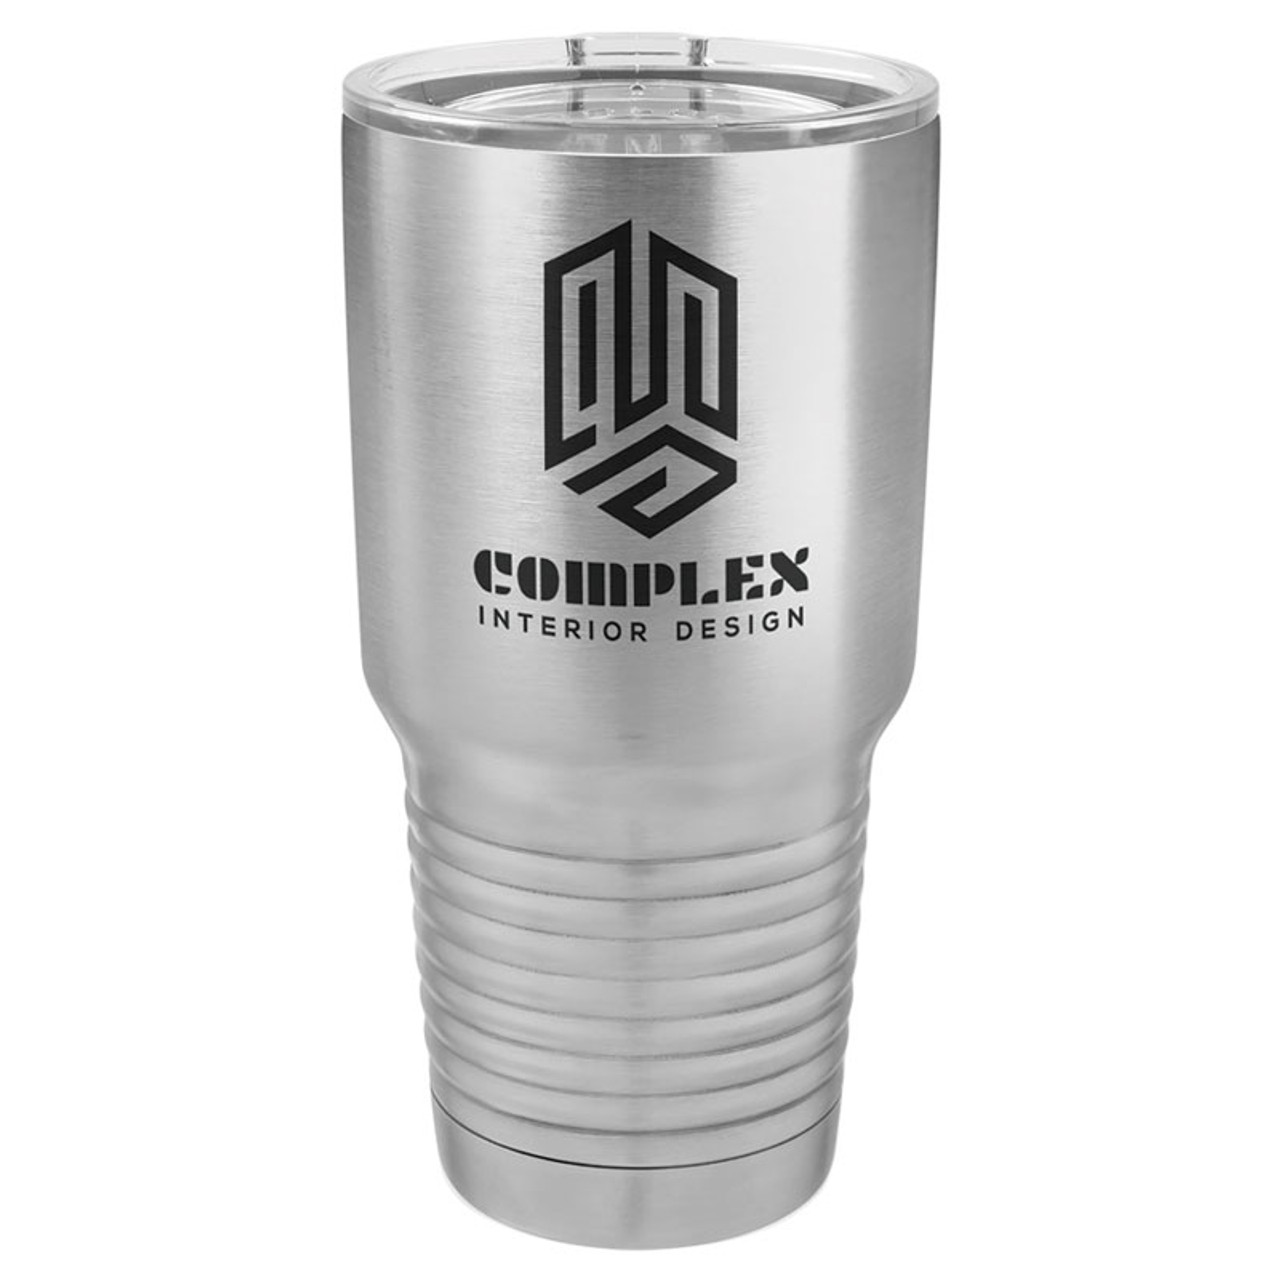 https://cdn11.bigcommerce.com/s-d22a0/images/stencil/1280x1280/products/2285/9959/personalized-tumblers-stainless-steel-custom-engraved-polar-camel-30oz__86762.1545154019.jpg?c=2